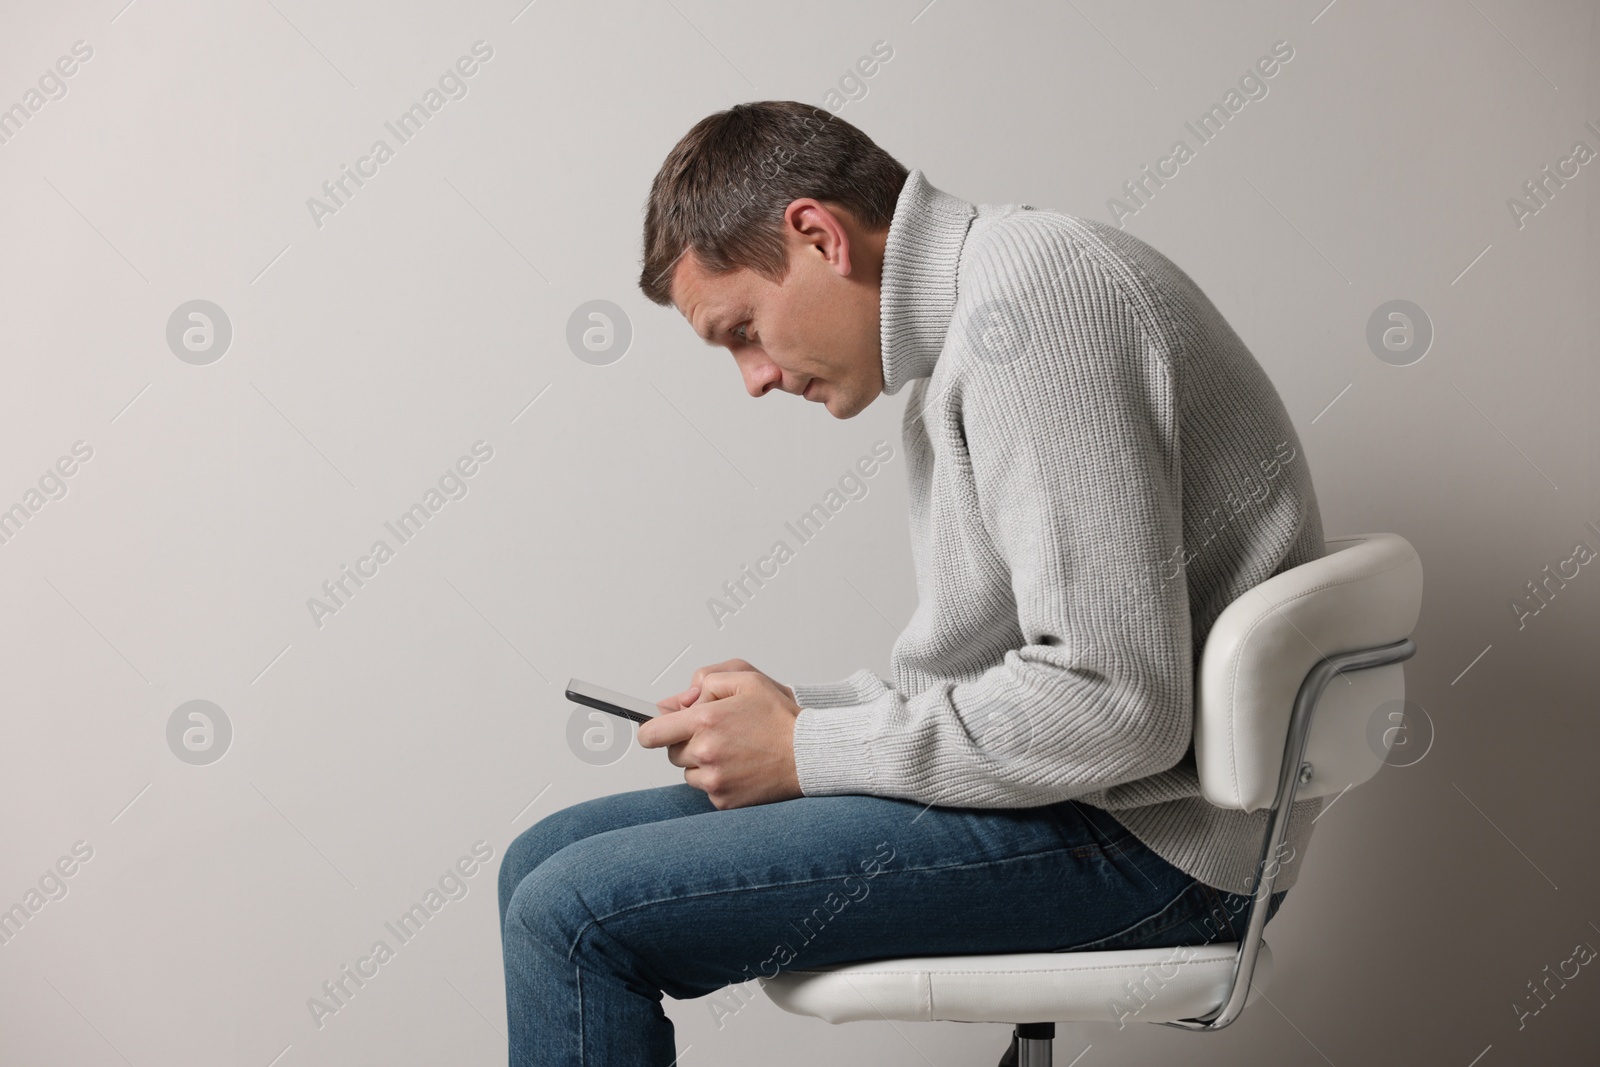 Photo of Man with bad posture using tablet while sitting on chair against grey background. Space for text